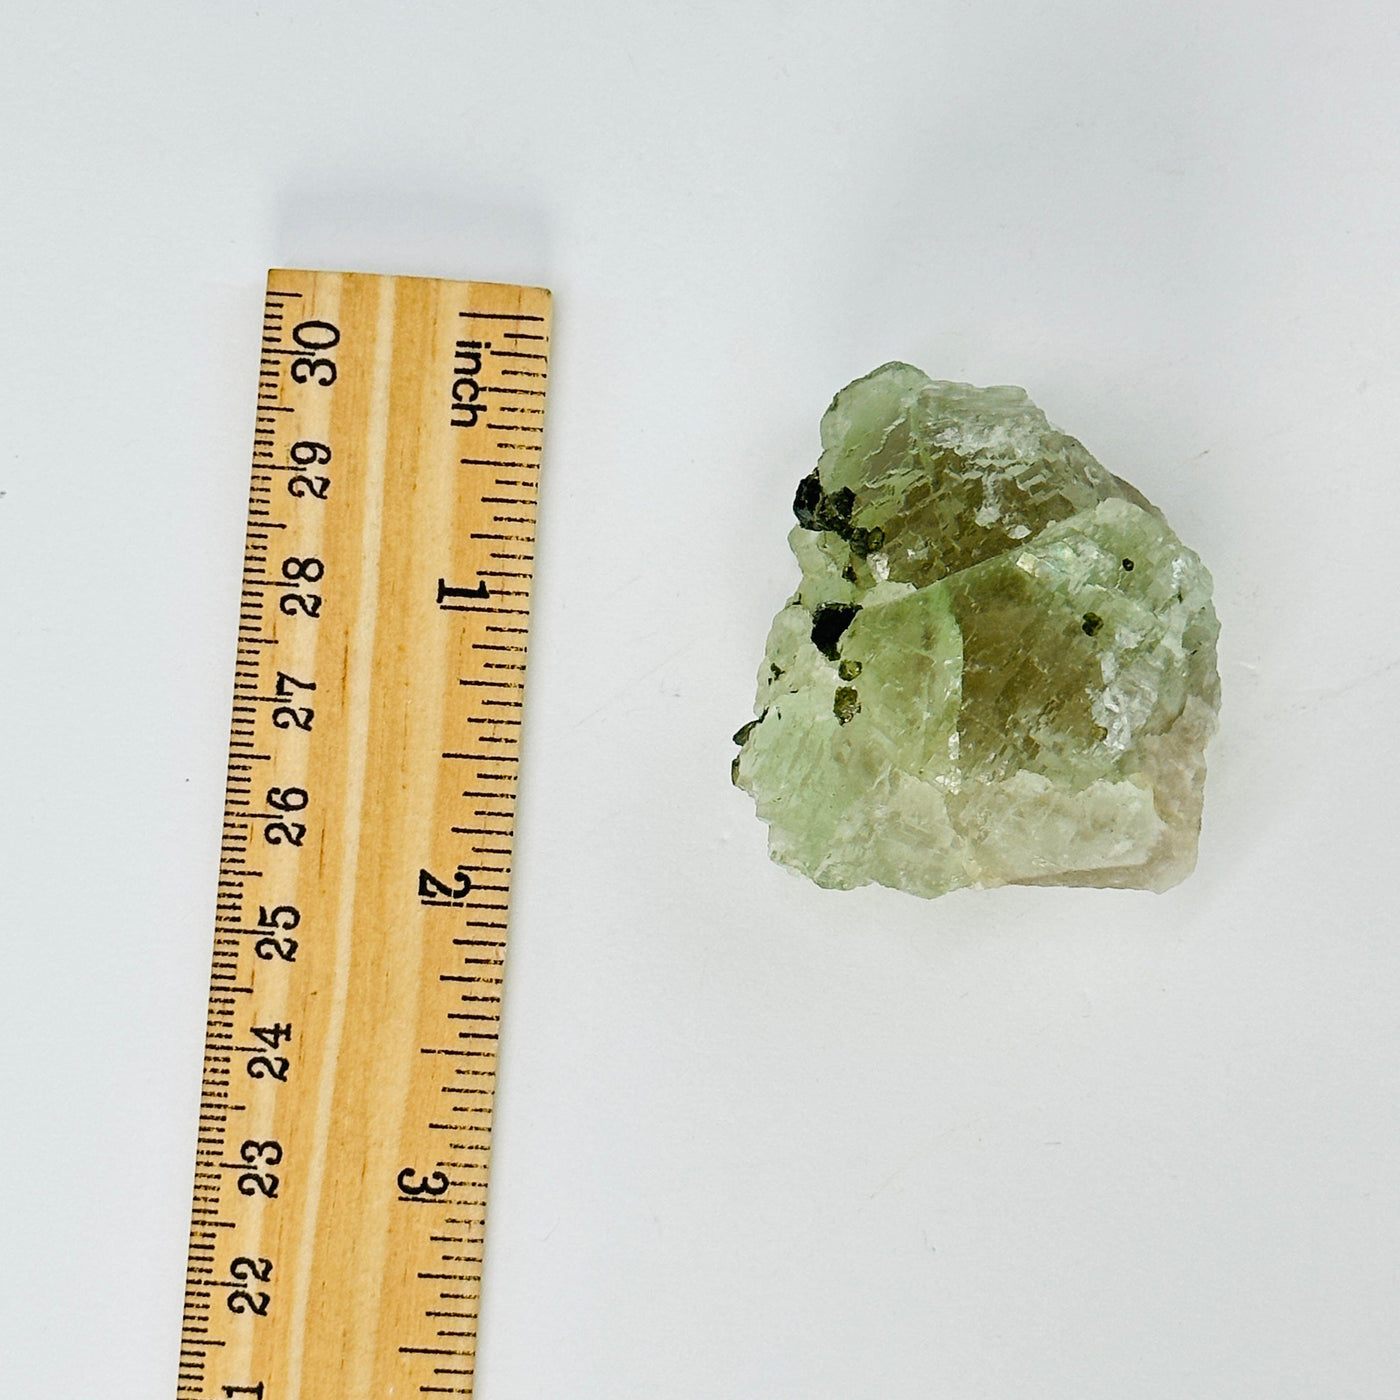 green fluorite with epidote growth next to a ruler for size reference